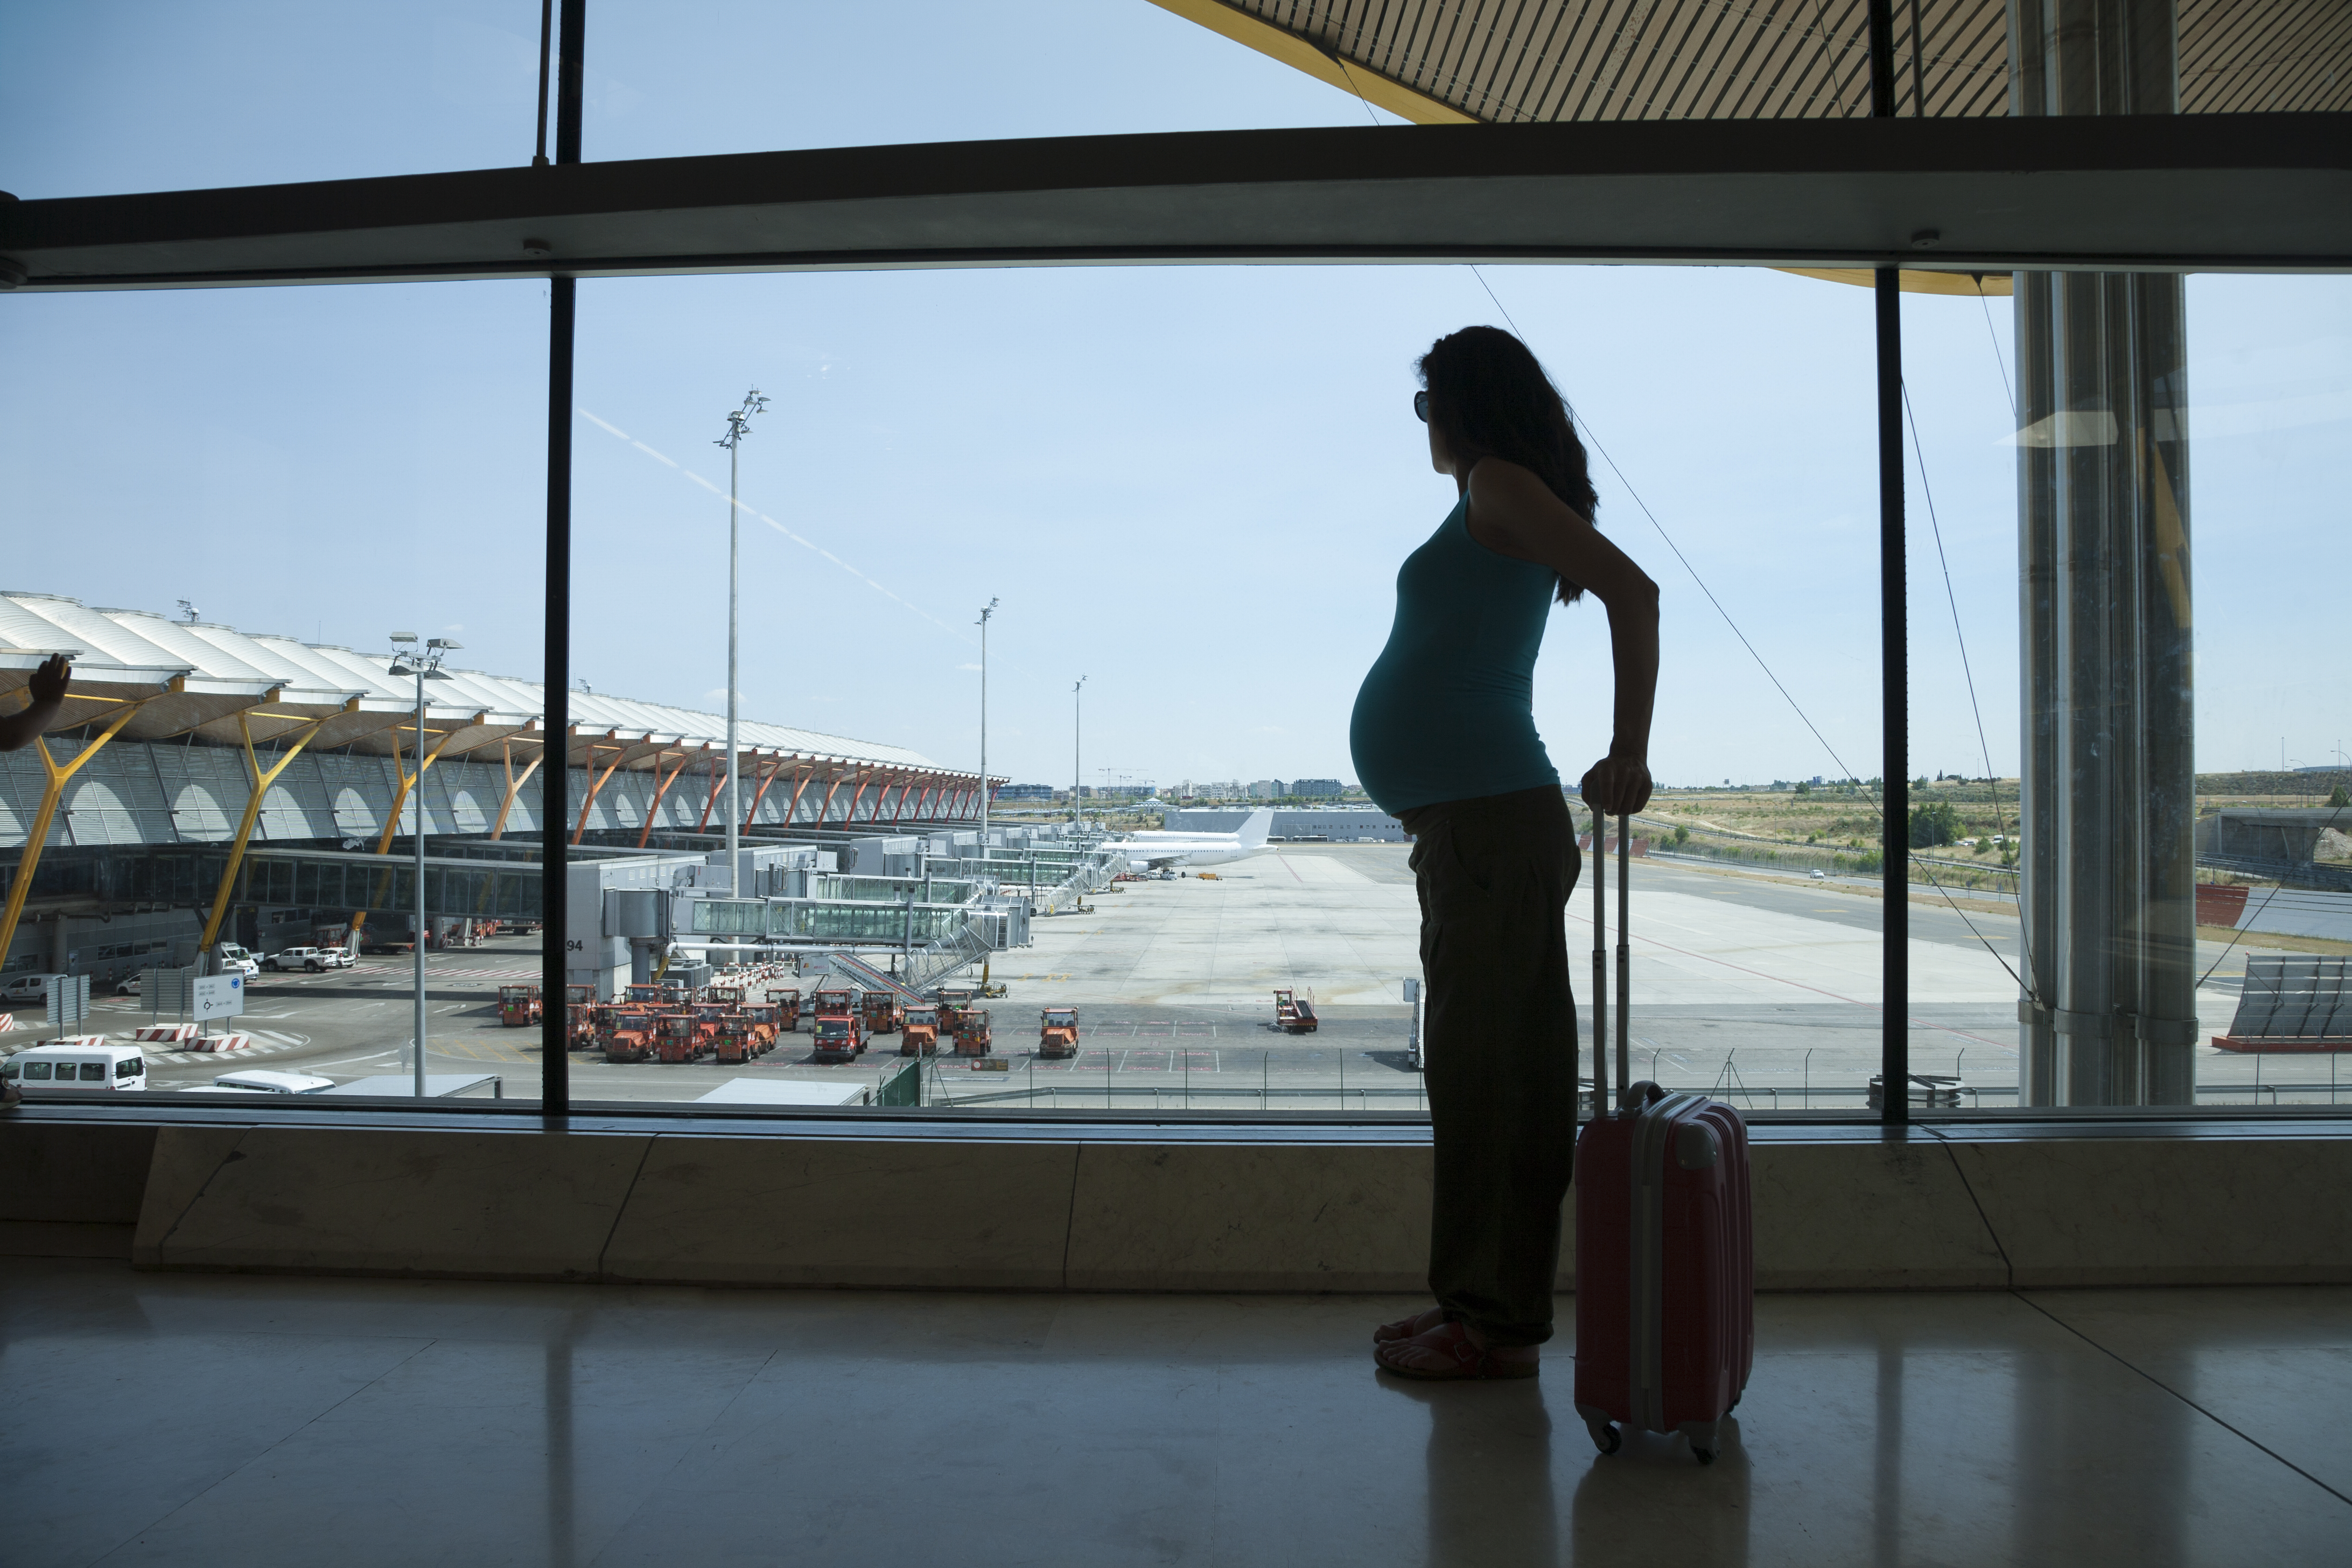 woman pregnant silhouette waiting to fly in airport hall